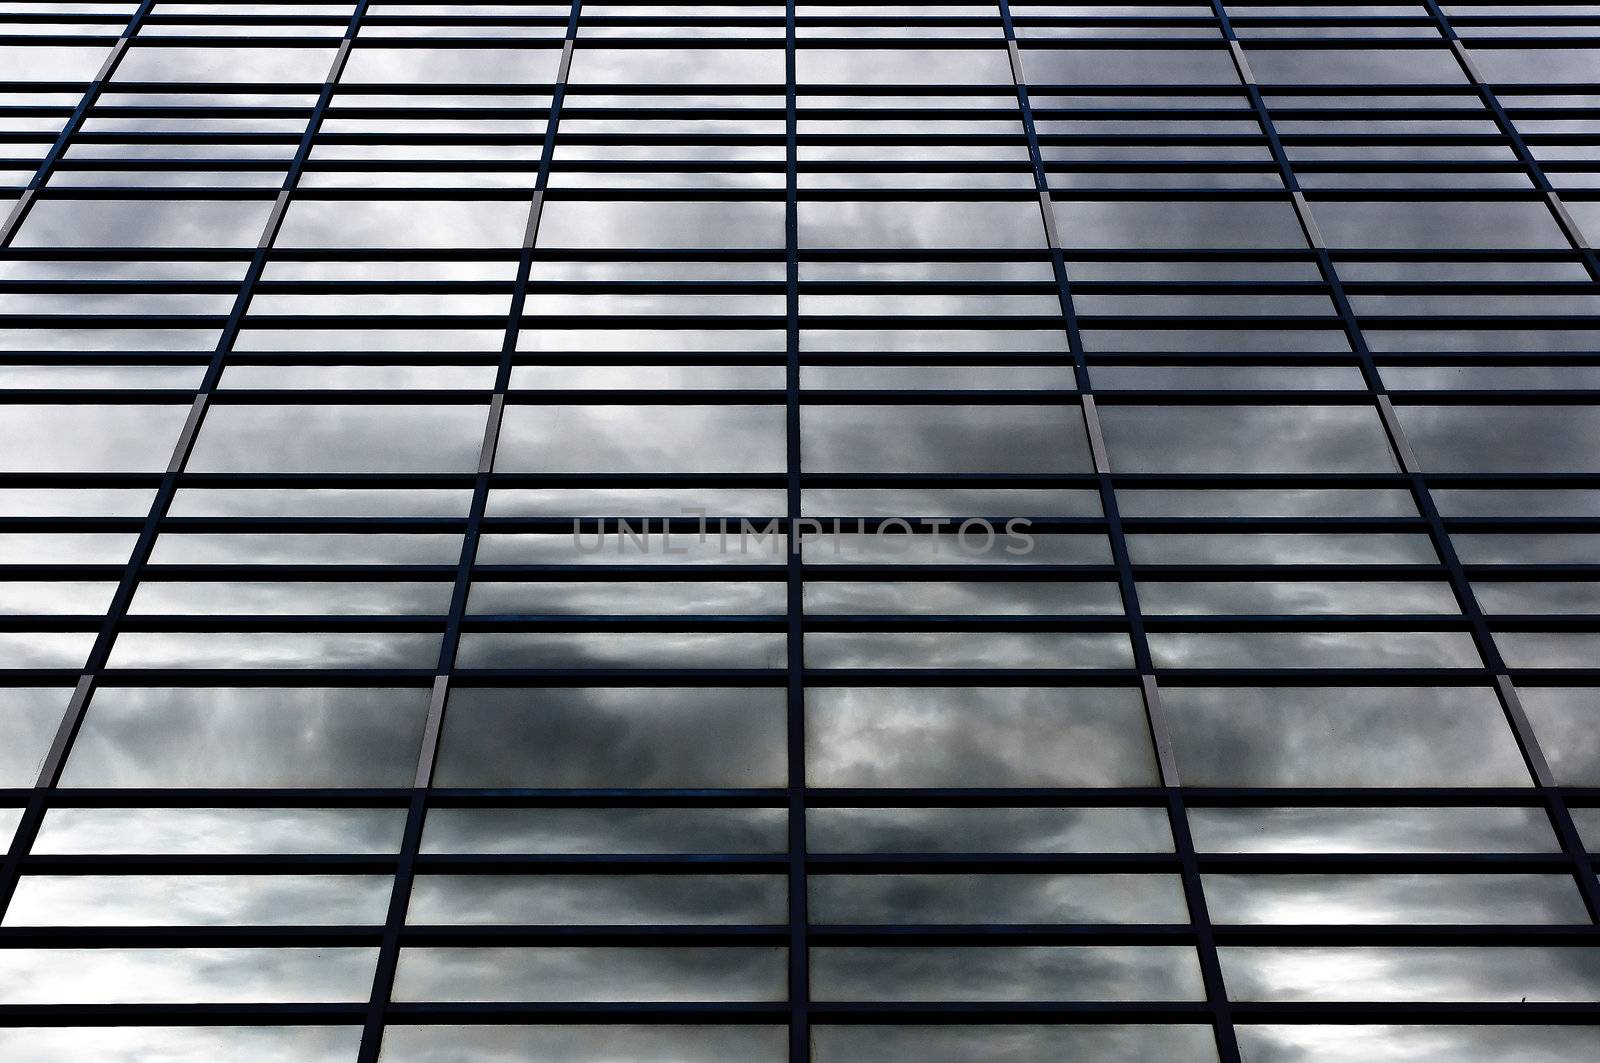 A selective shot of rows of windows in a grid pattern reflecting stormy skies.